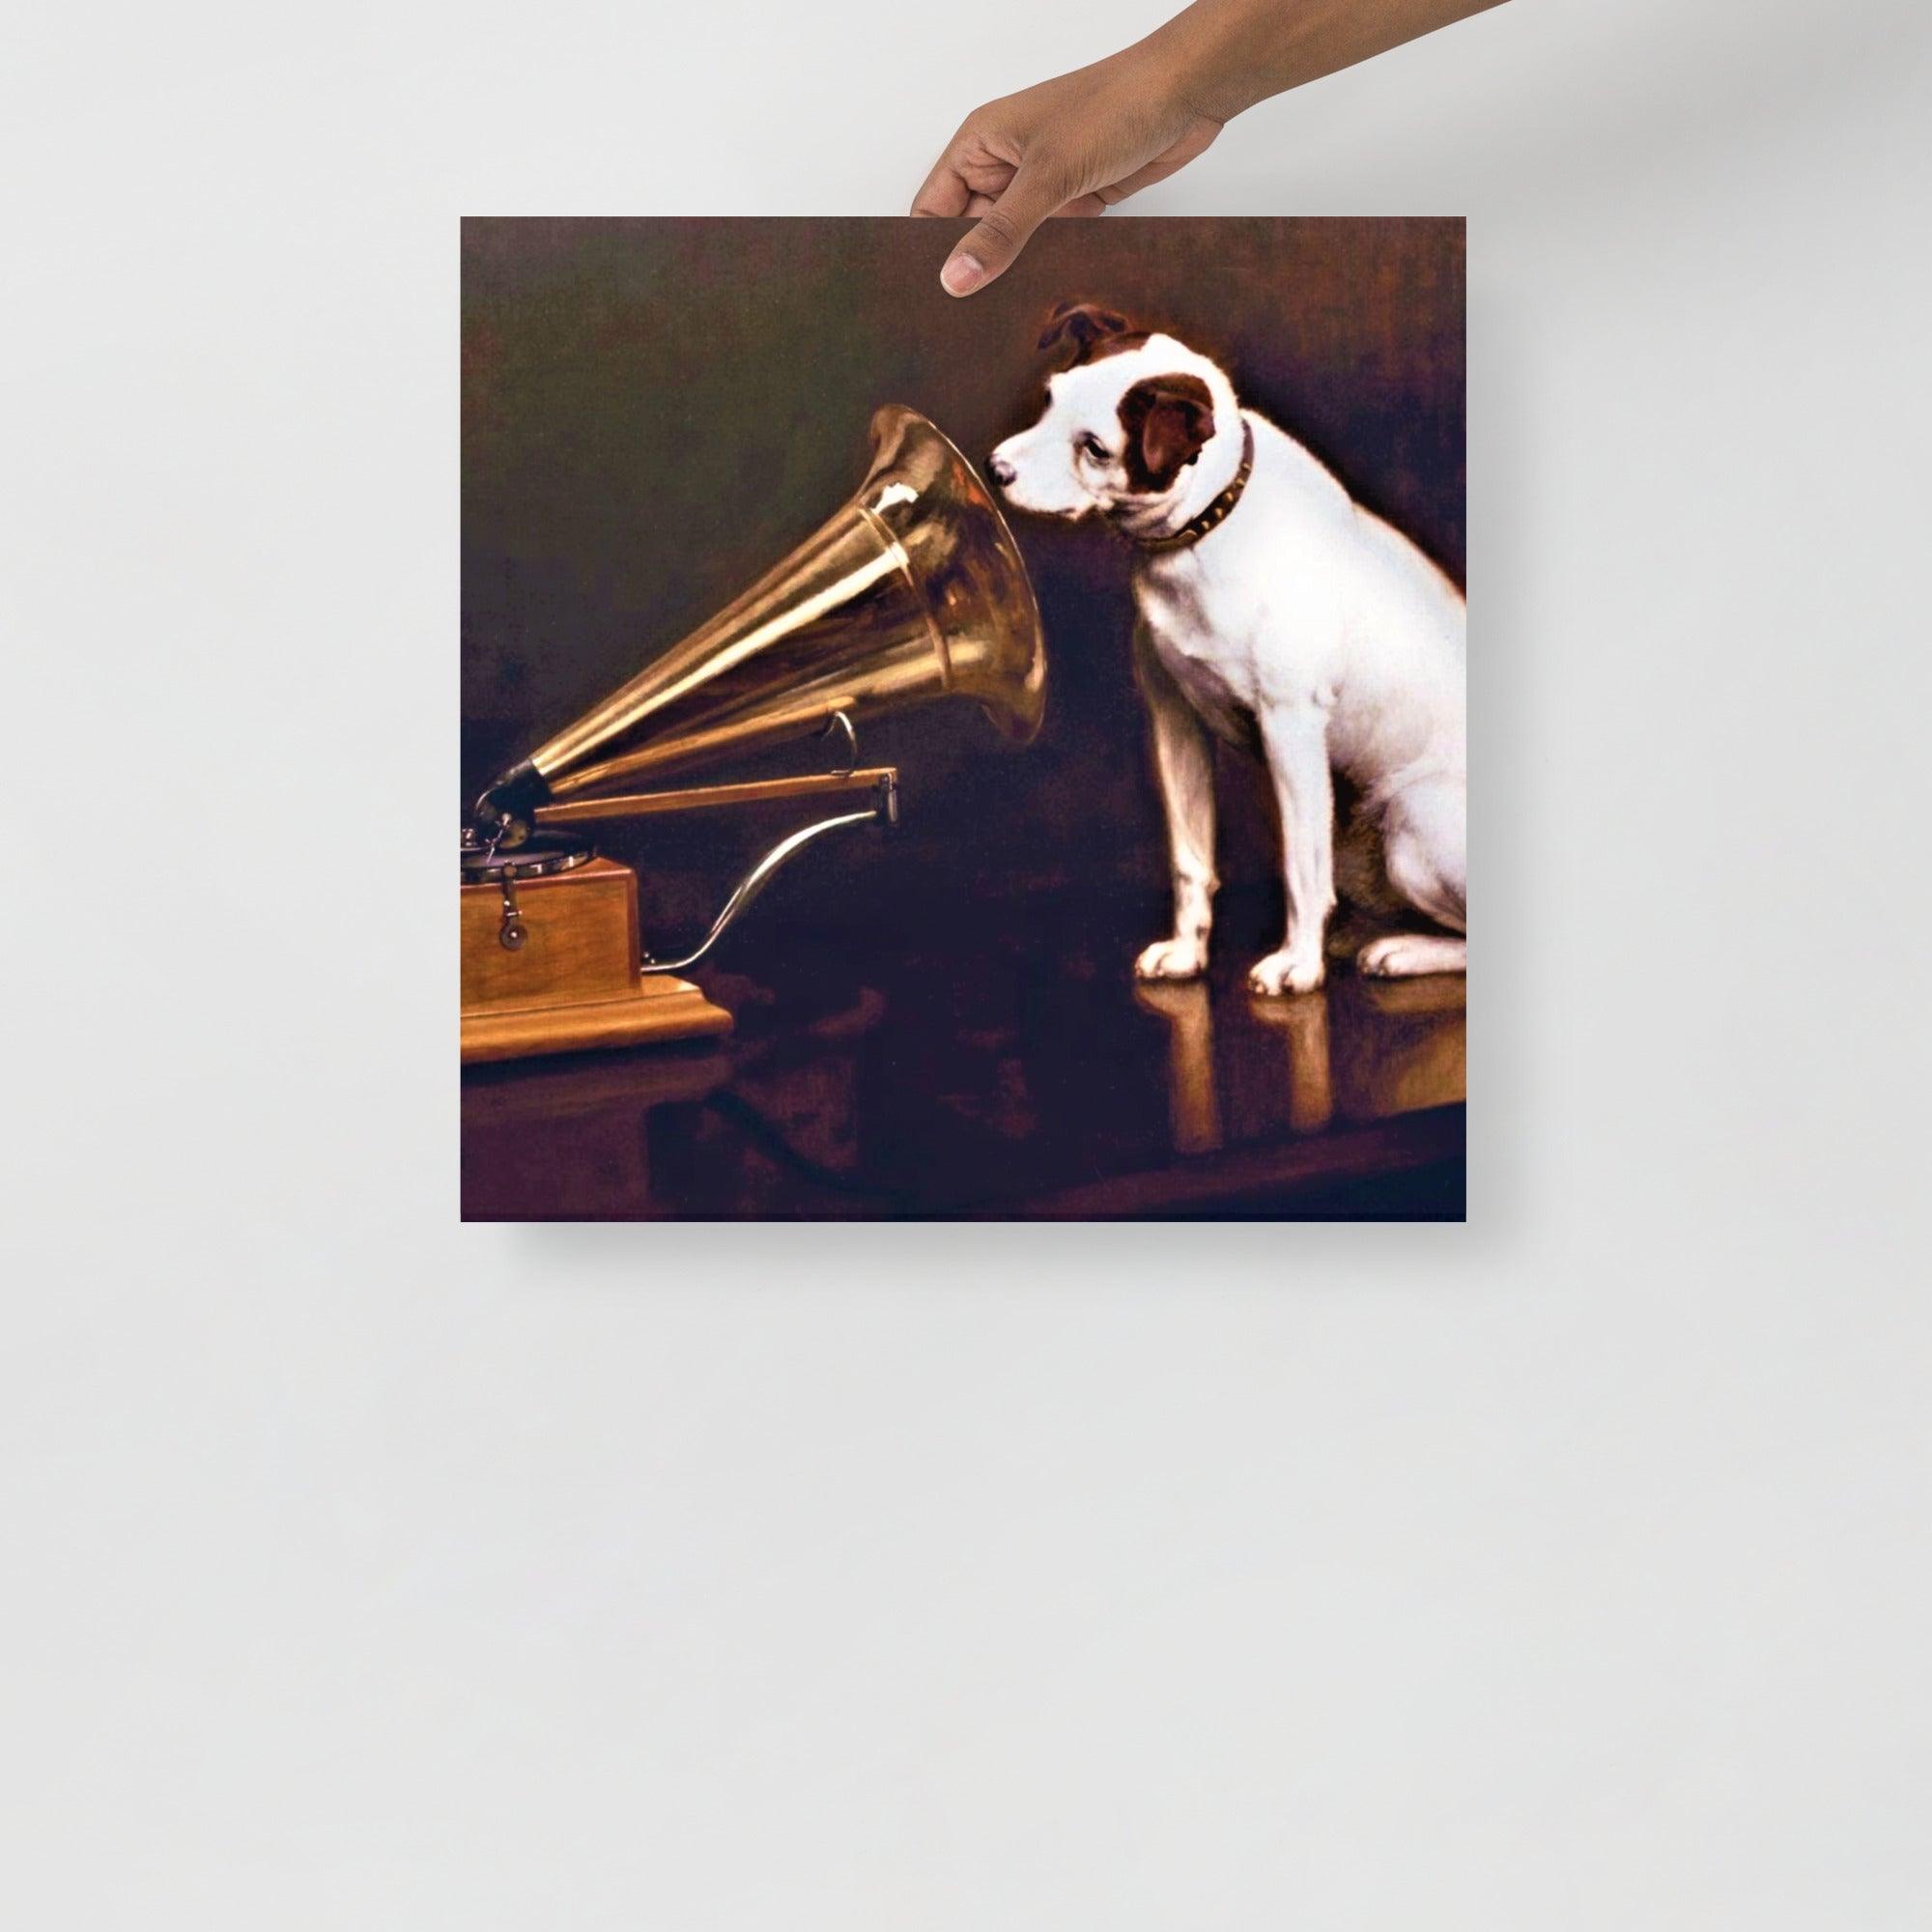 A His Master's Voice By Francis Barraud poster on a plain backdrop in size 18x18”.